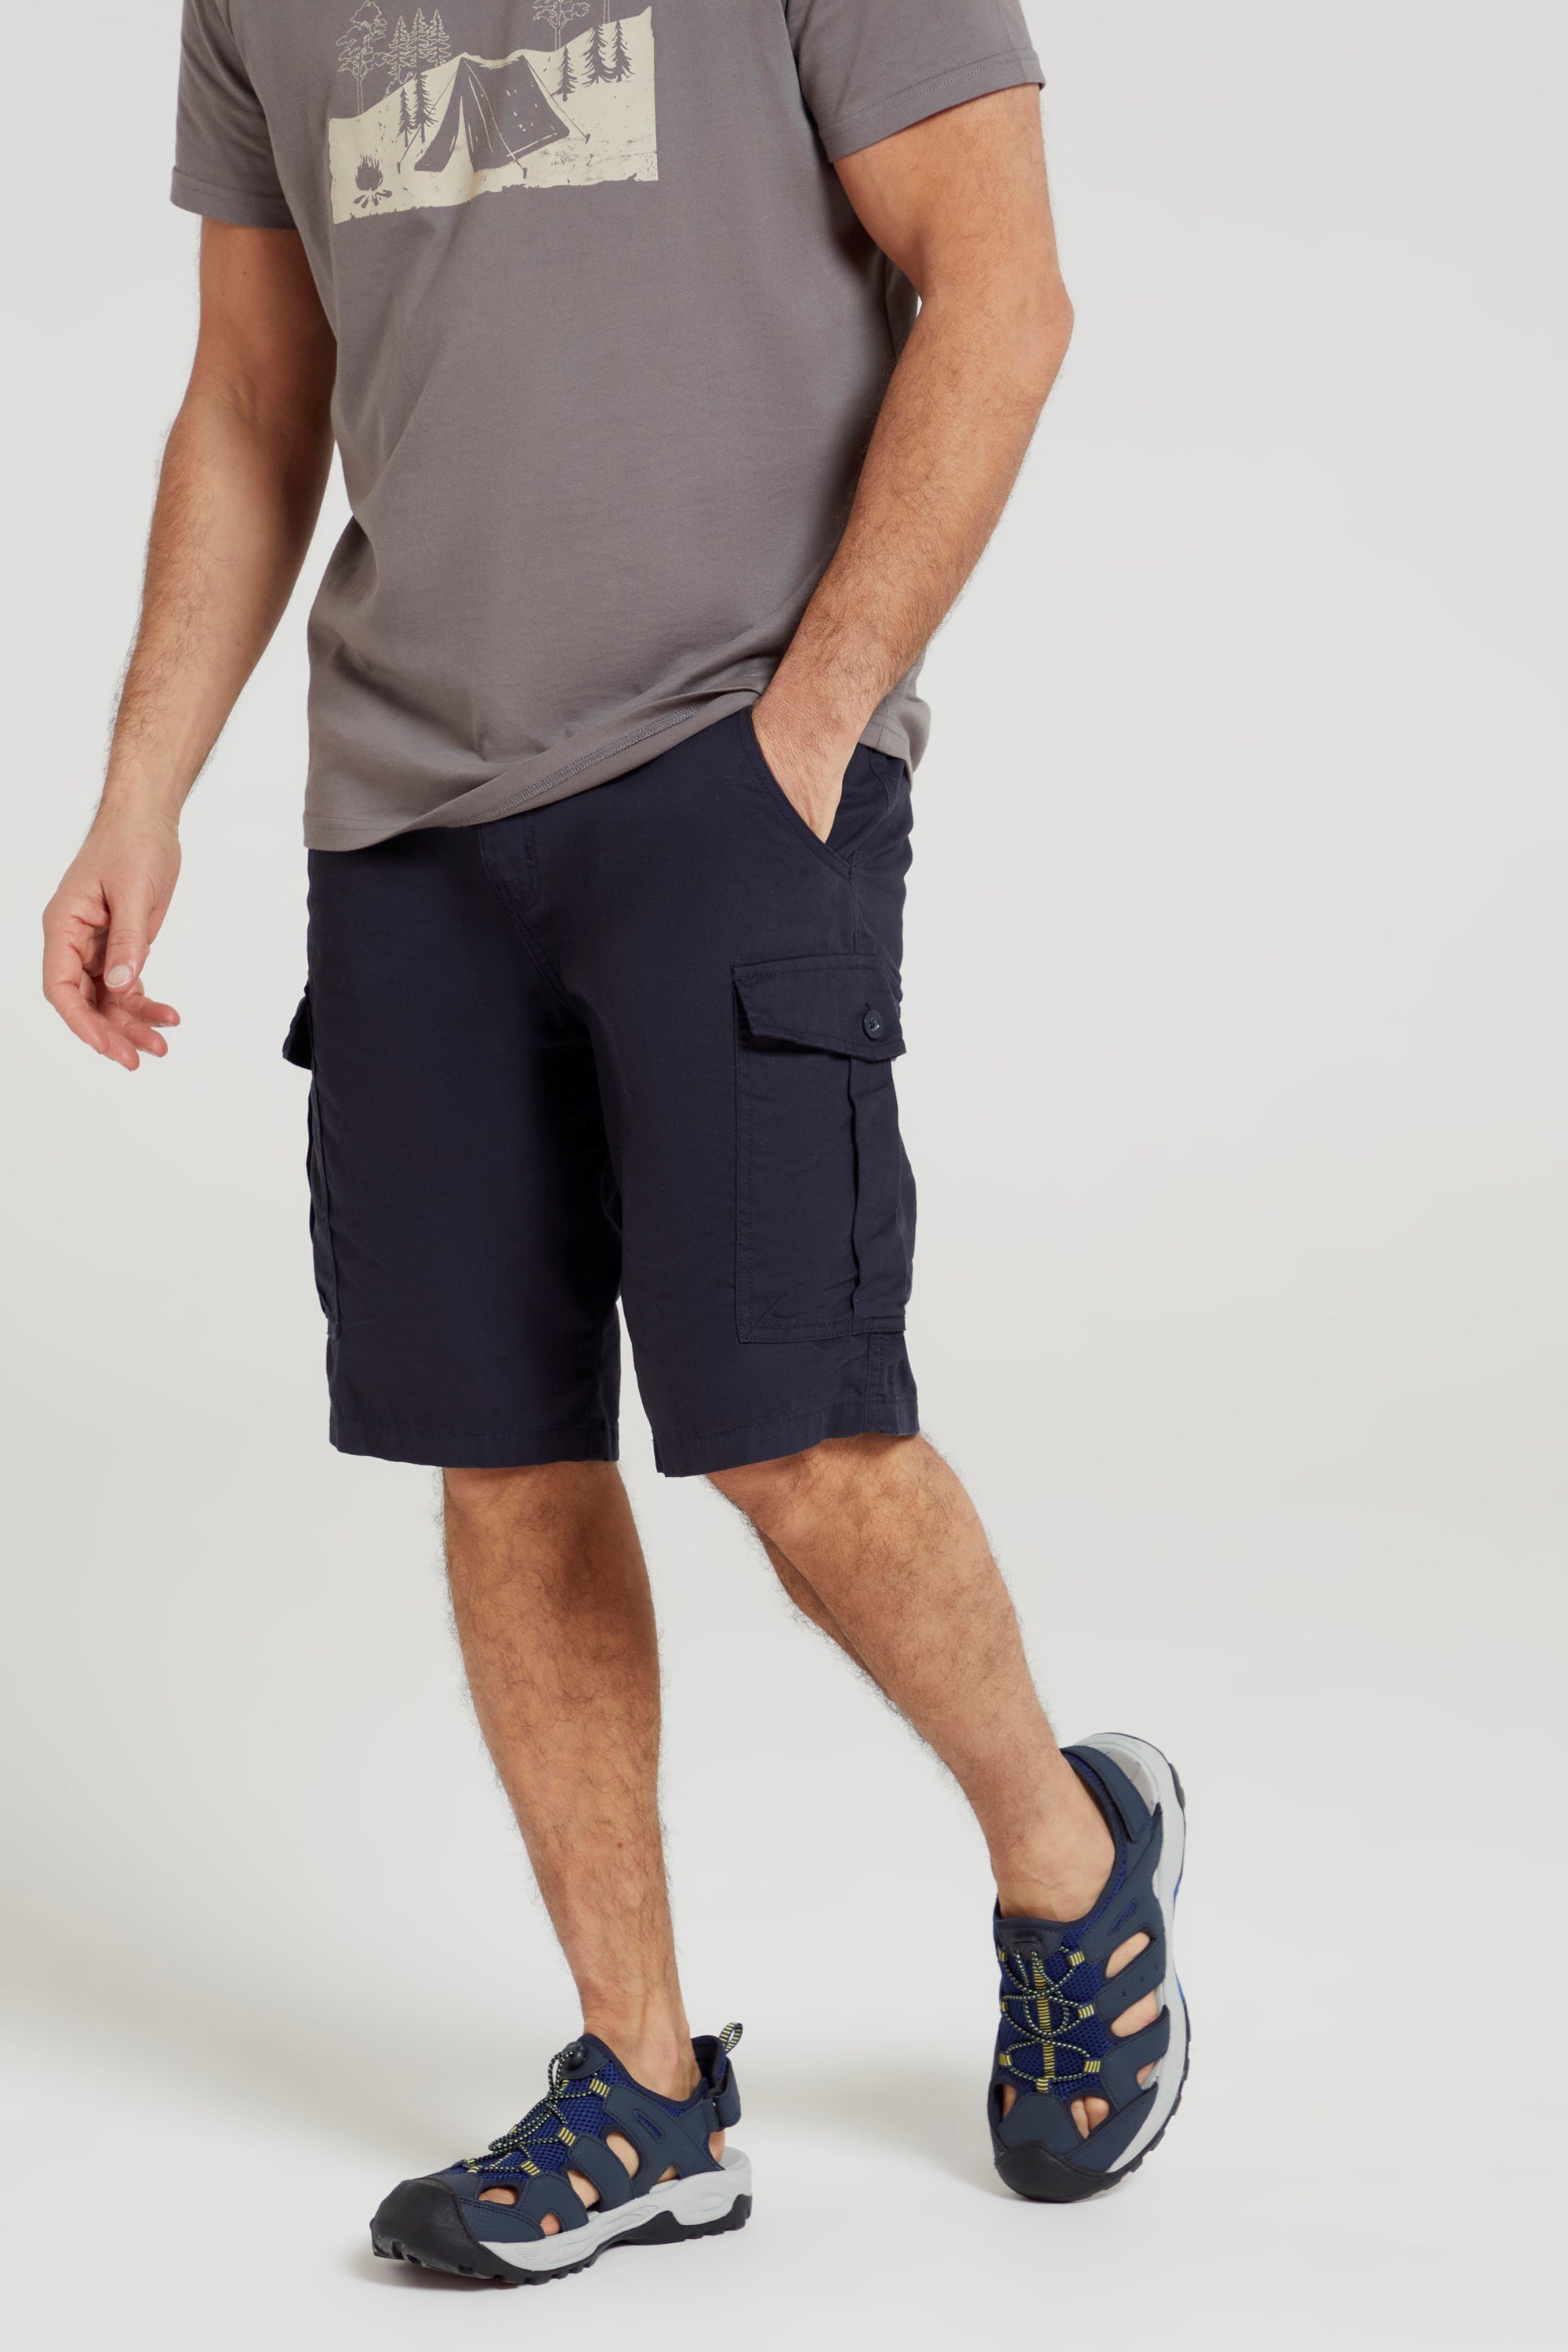 Buy Clothing Shorts (Casual & Active) Best Deals 